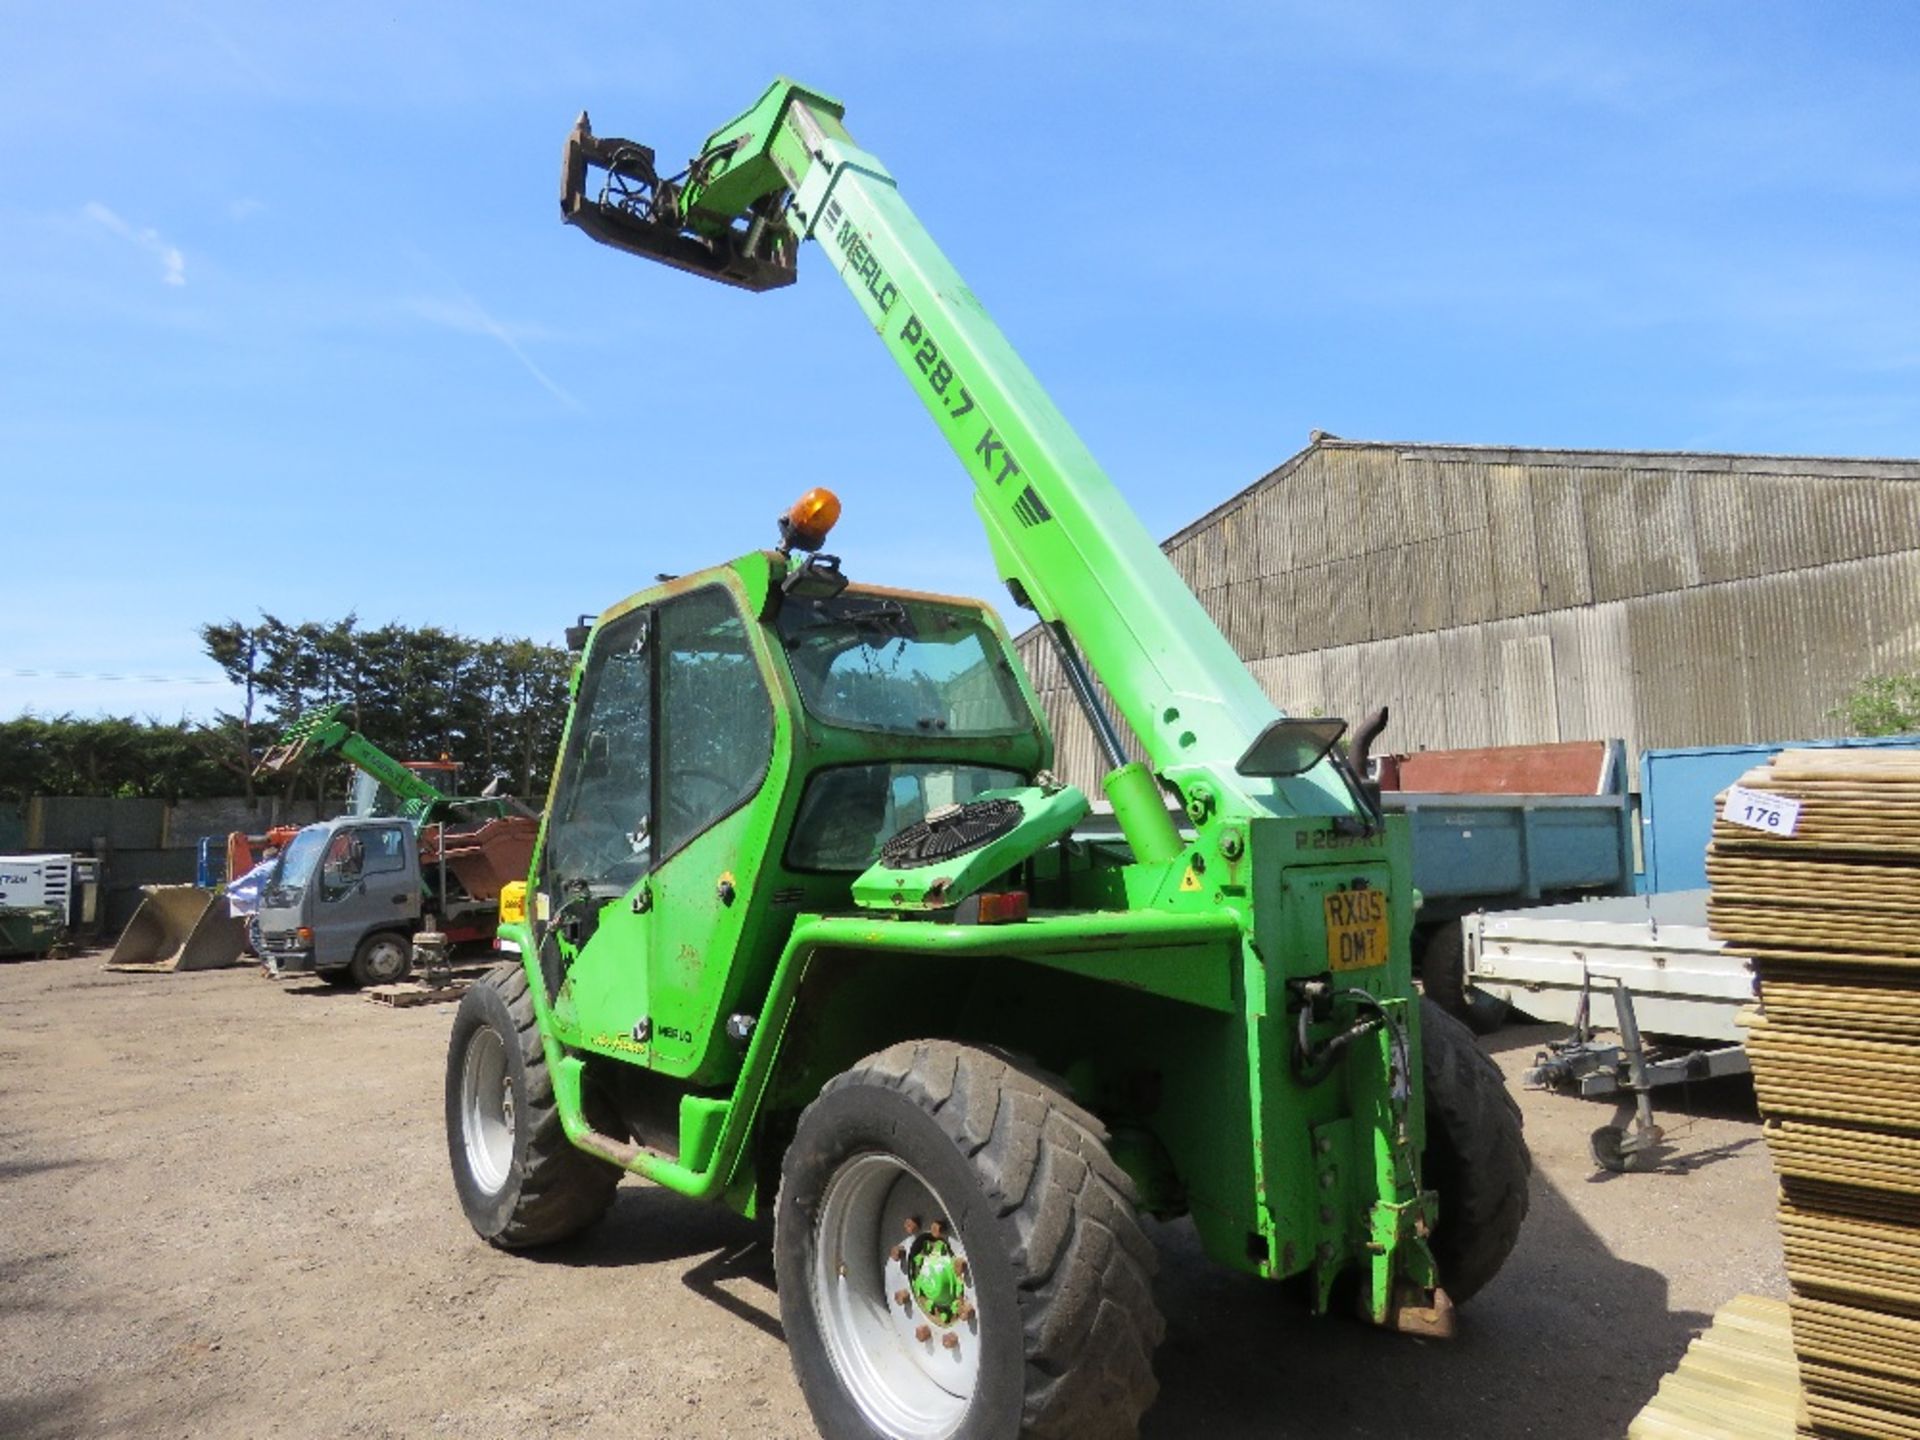 MERLO PANORAMIC P28.7 AGRI SPEC TELESCOPIC HANDLER, YEAR 2004 BUILD. 9764 REC HOURS. WHEN TESTED WAS - Image 3 of 13